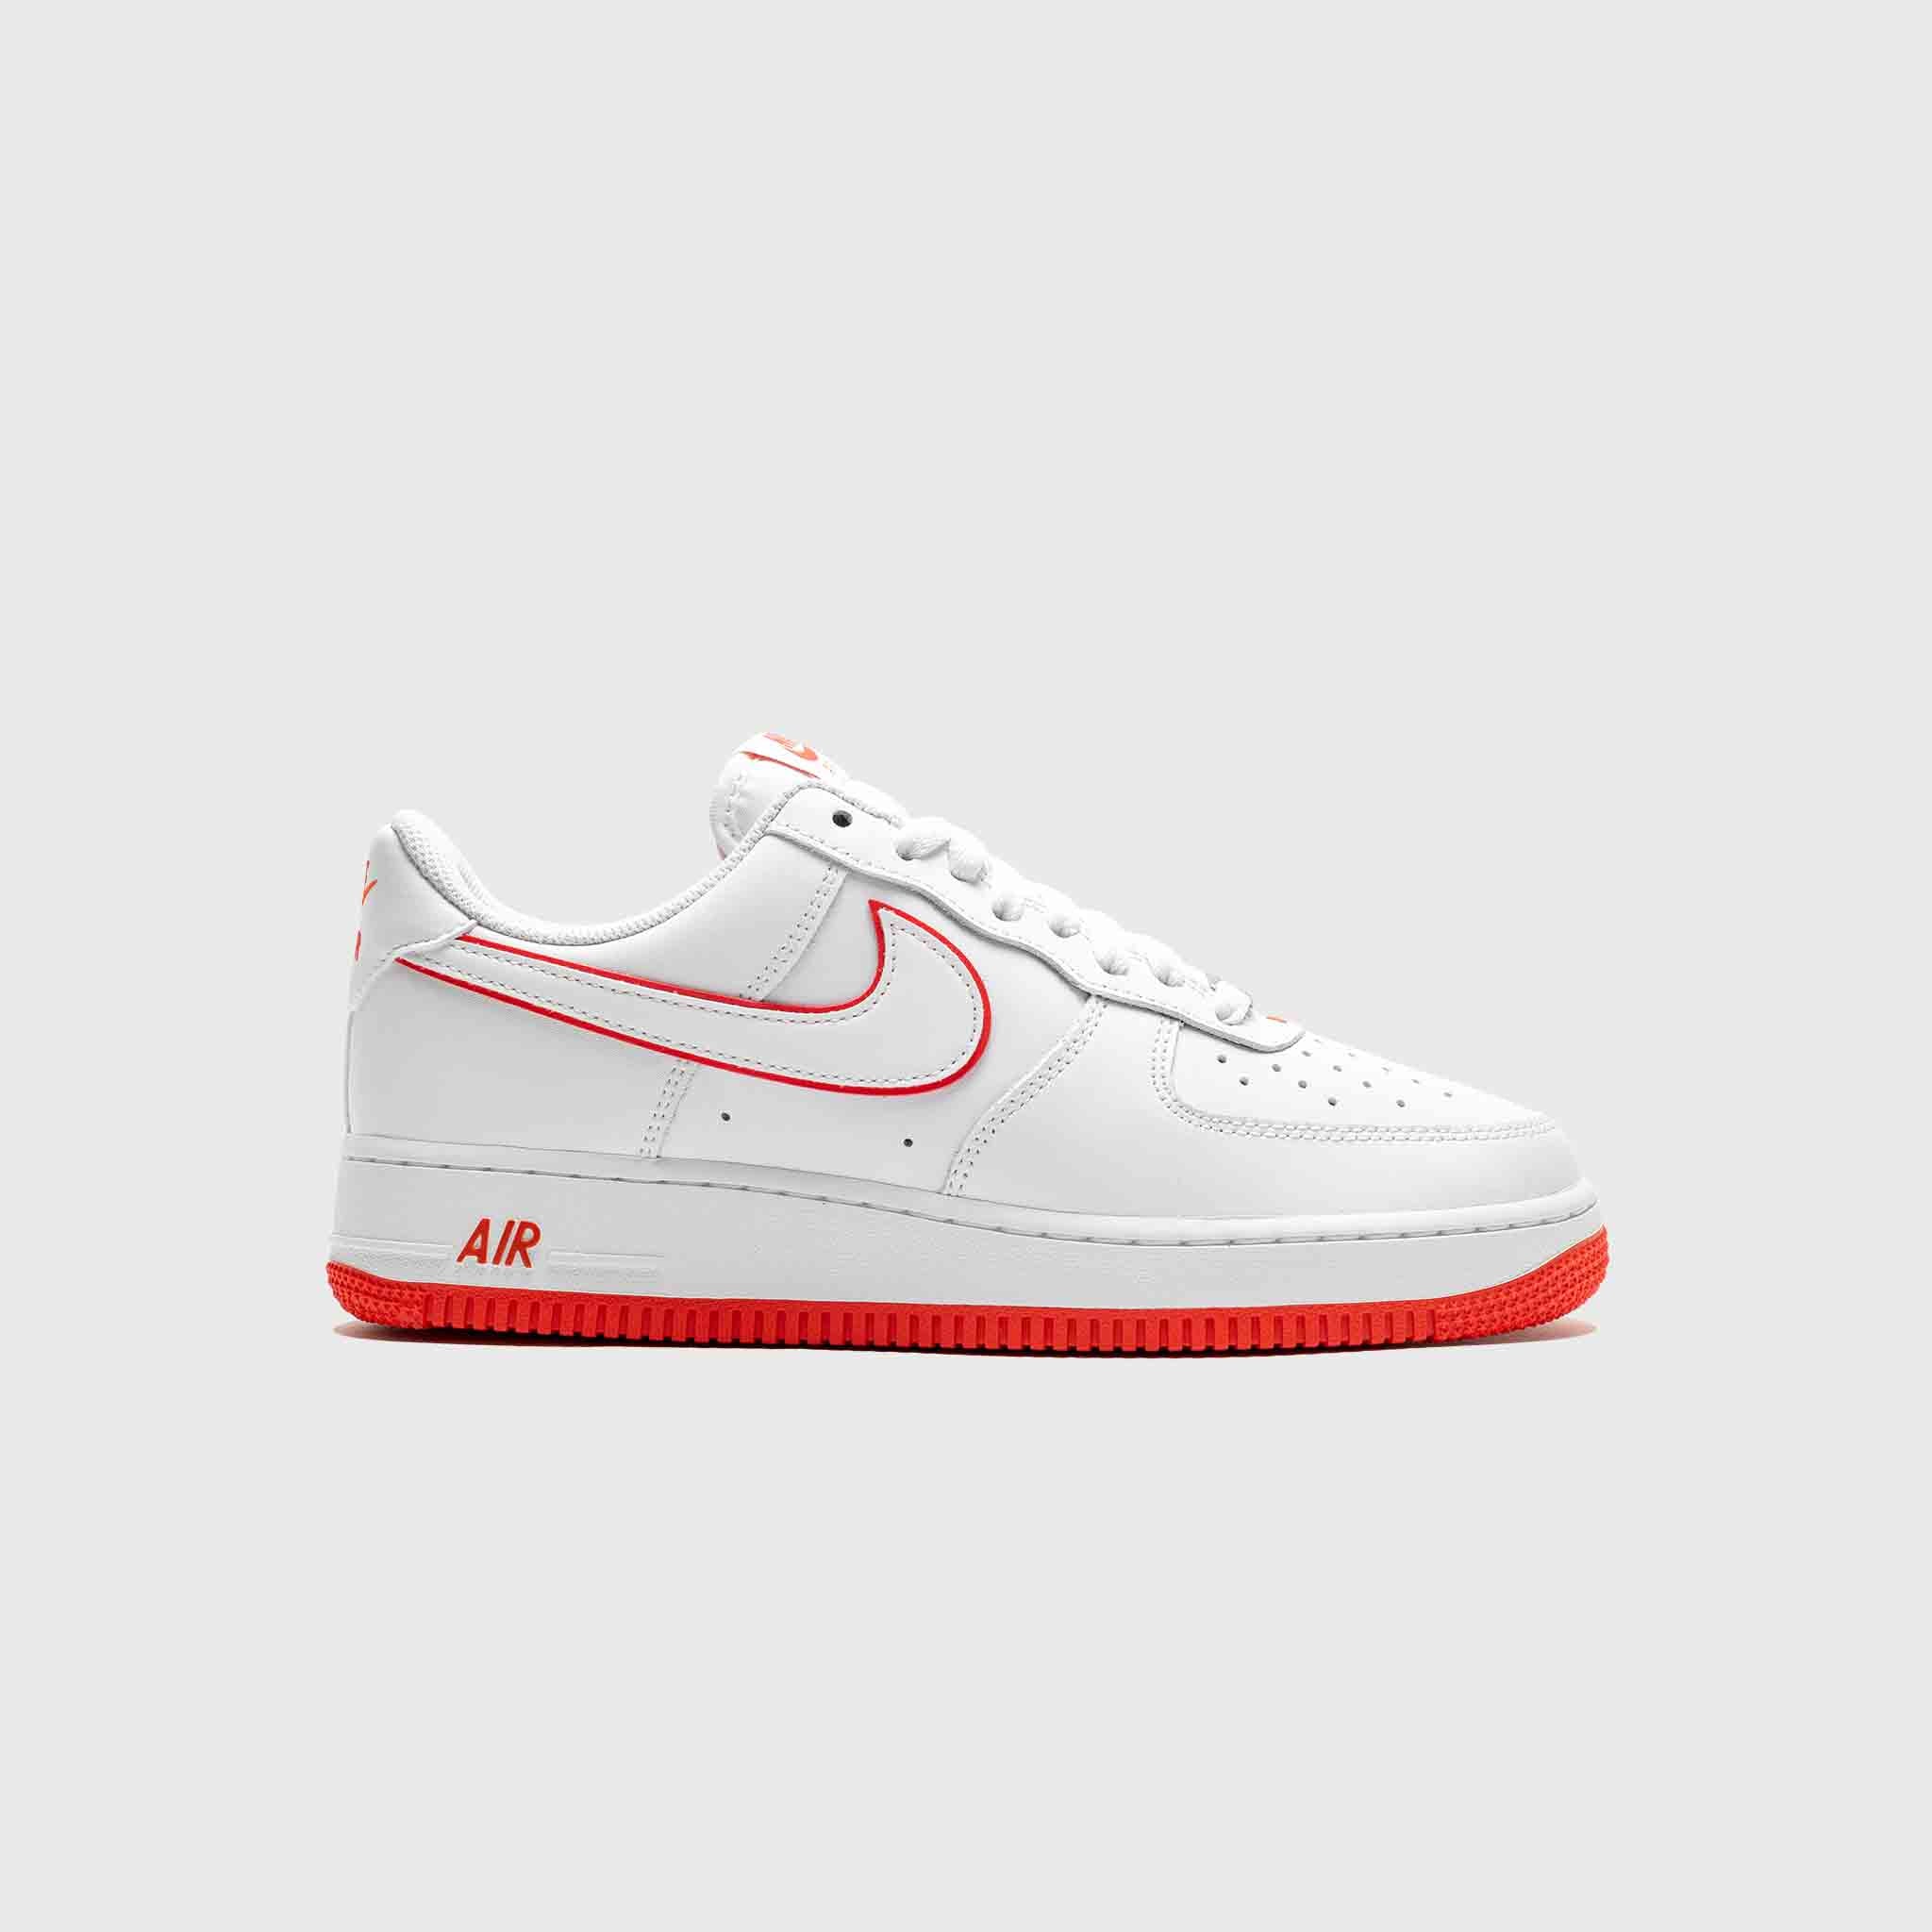 AIR FORCE 1 '07 PICANTE RED – PACKER SHOES